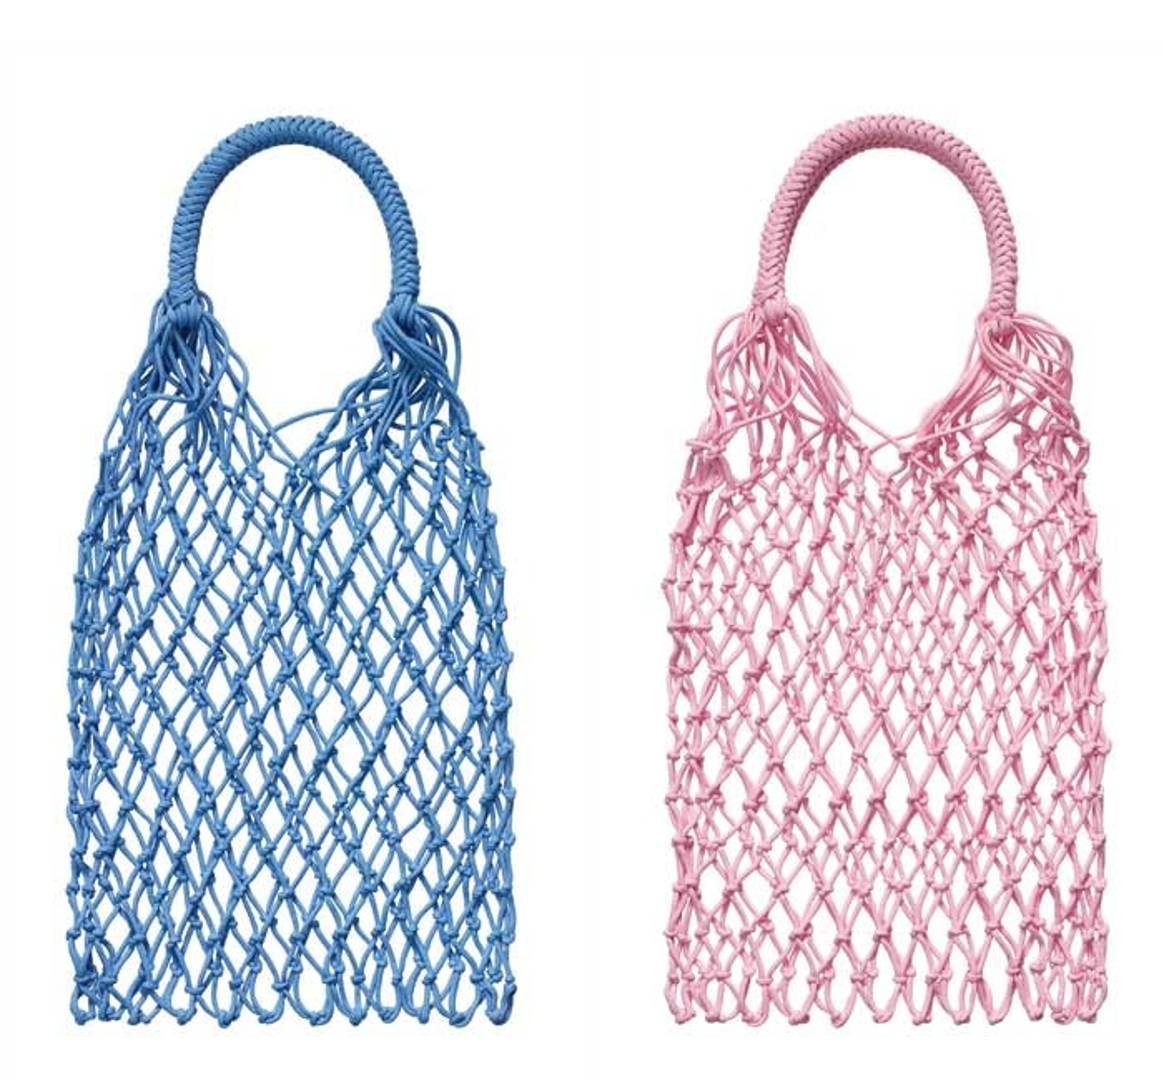 H&M debuts collection made from shoreline plastic